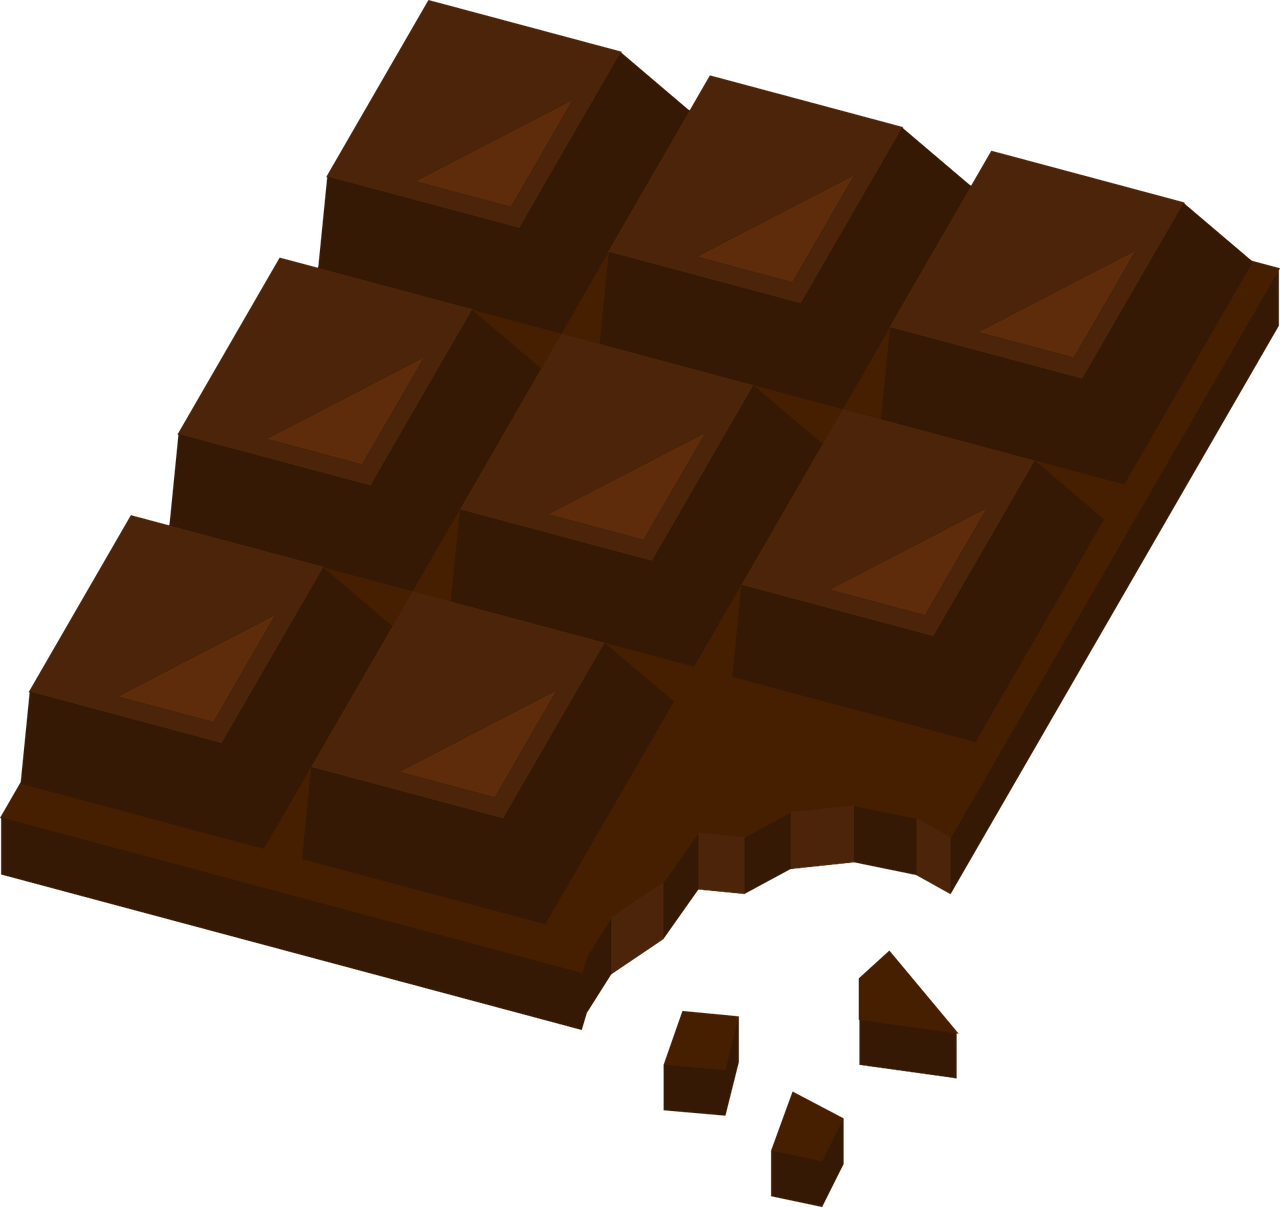 Chocolate, Sweet, Dessert, Cocoa, Candy - Dark Chocolate Vector Png (1280x1207)